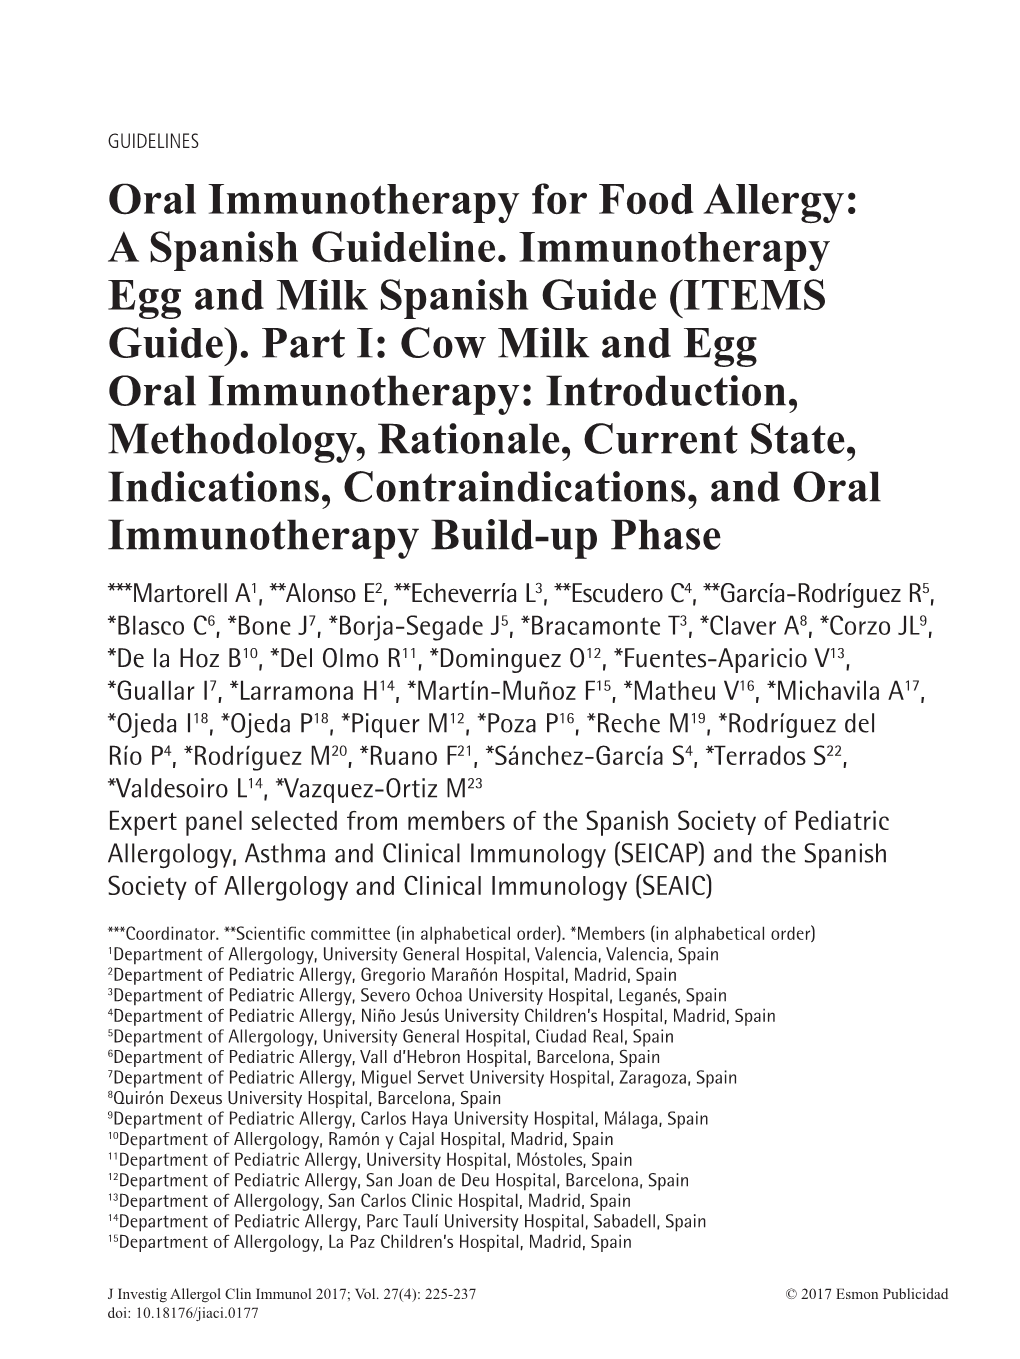 Oral Immunotherapy for Food Allergy: a Spanish Guideline